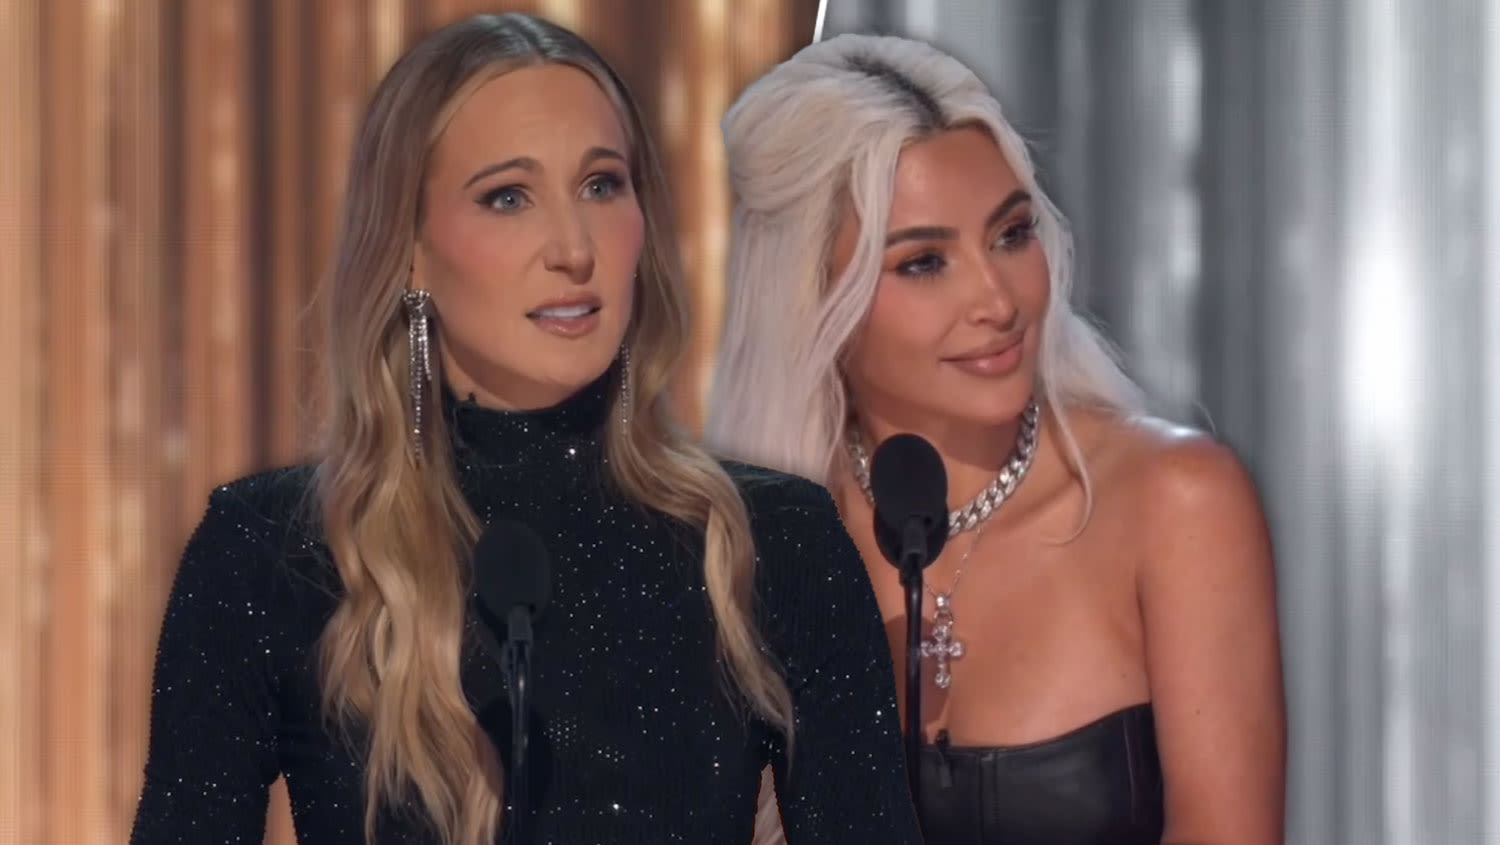 Nikki Glaser Says Kim Kardashian Booing At Tom Brady’s Roast Was Not Fueled By Taylor Swift Fans: “People...